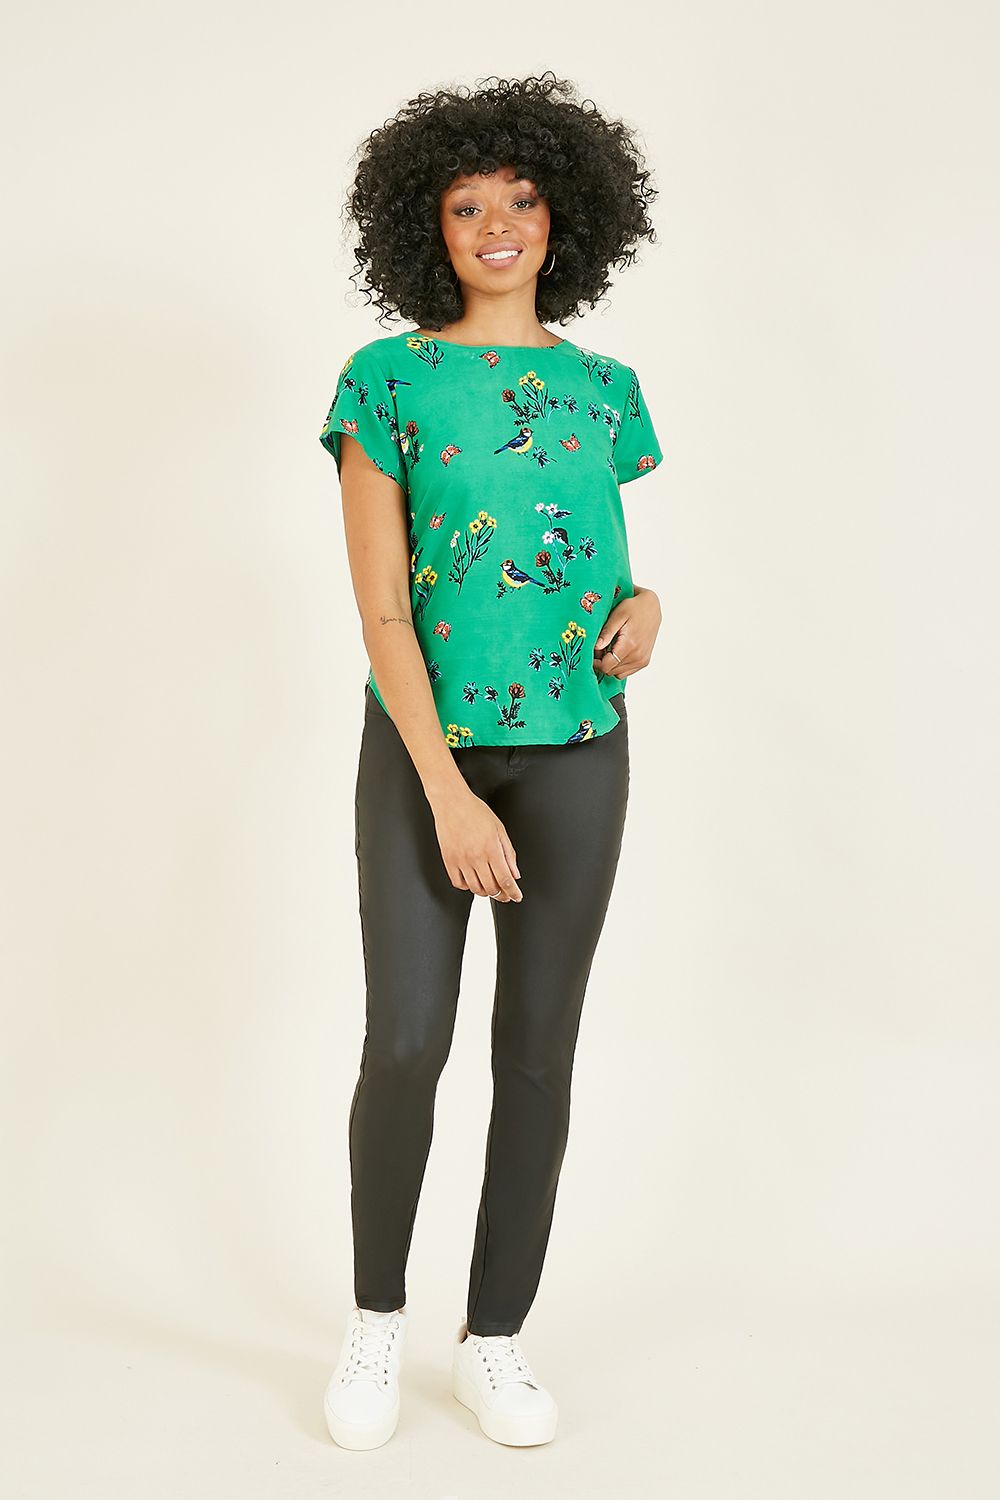 This Yumi Green Bird Print Short Sleeve Top is stylish, elegant and practical. Features a delicate bird print and bold green base. Match wide legged trousers or skinny jeans to complete the look.